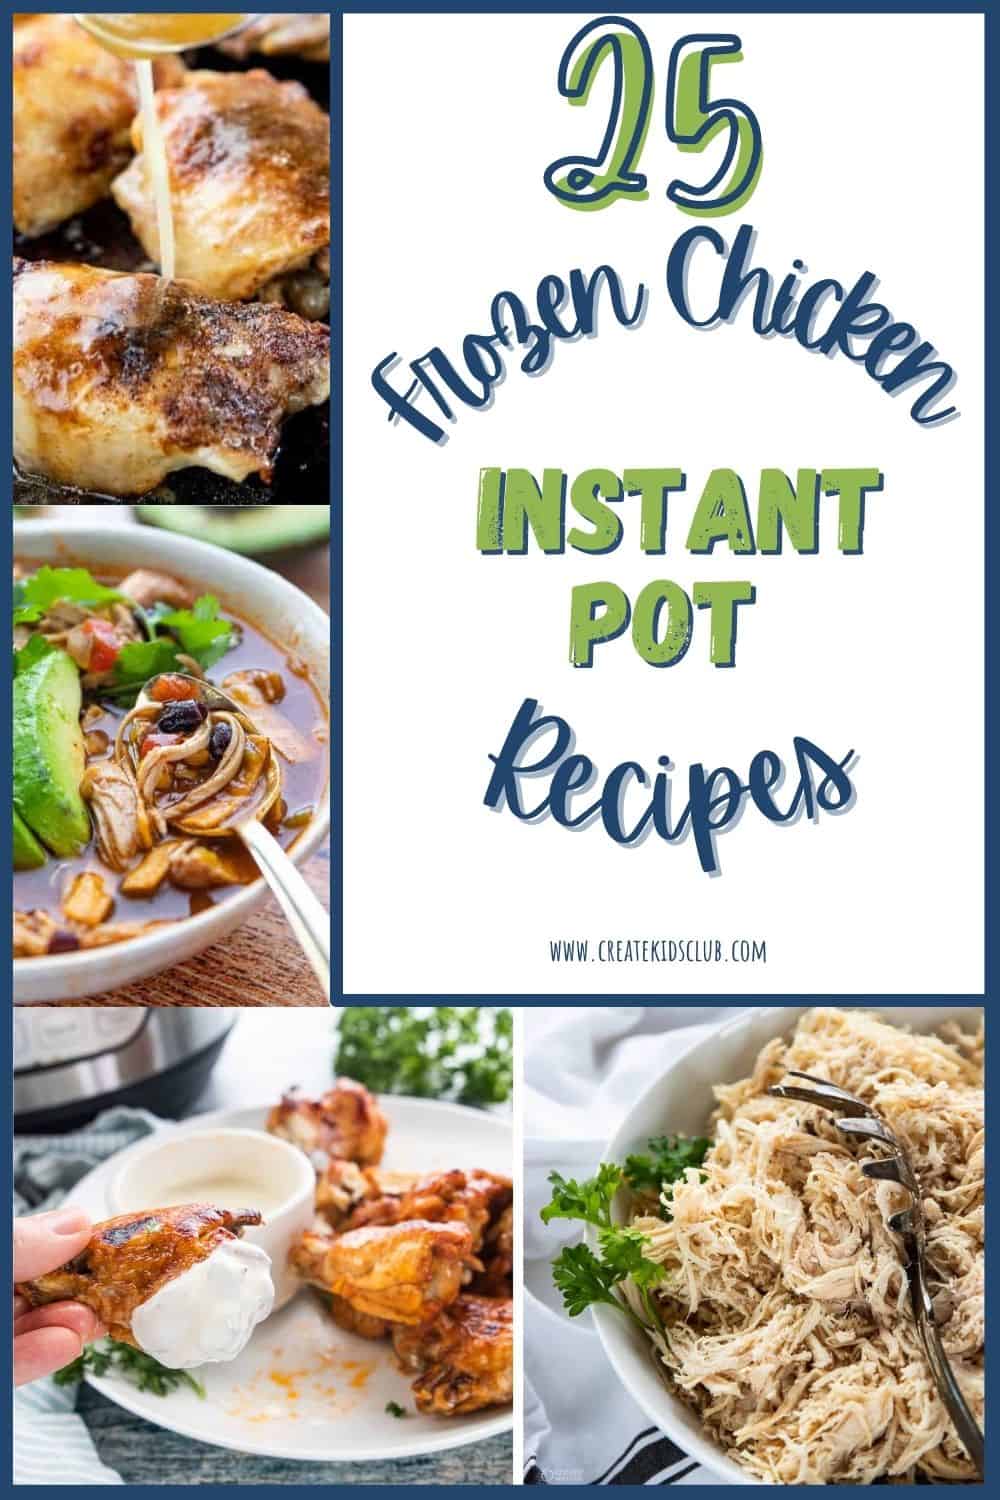 The words 25 frozen chicken instant pot recipes with photos of 4 chicken recipes.